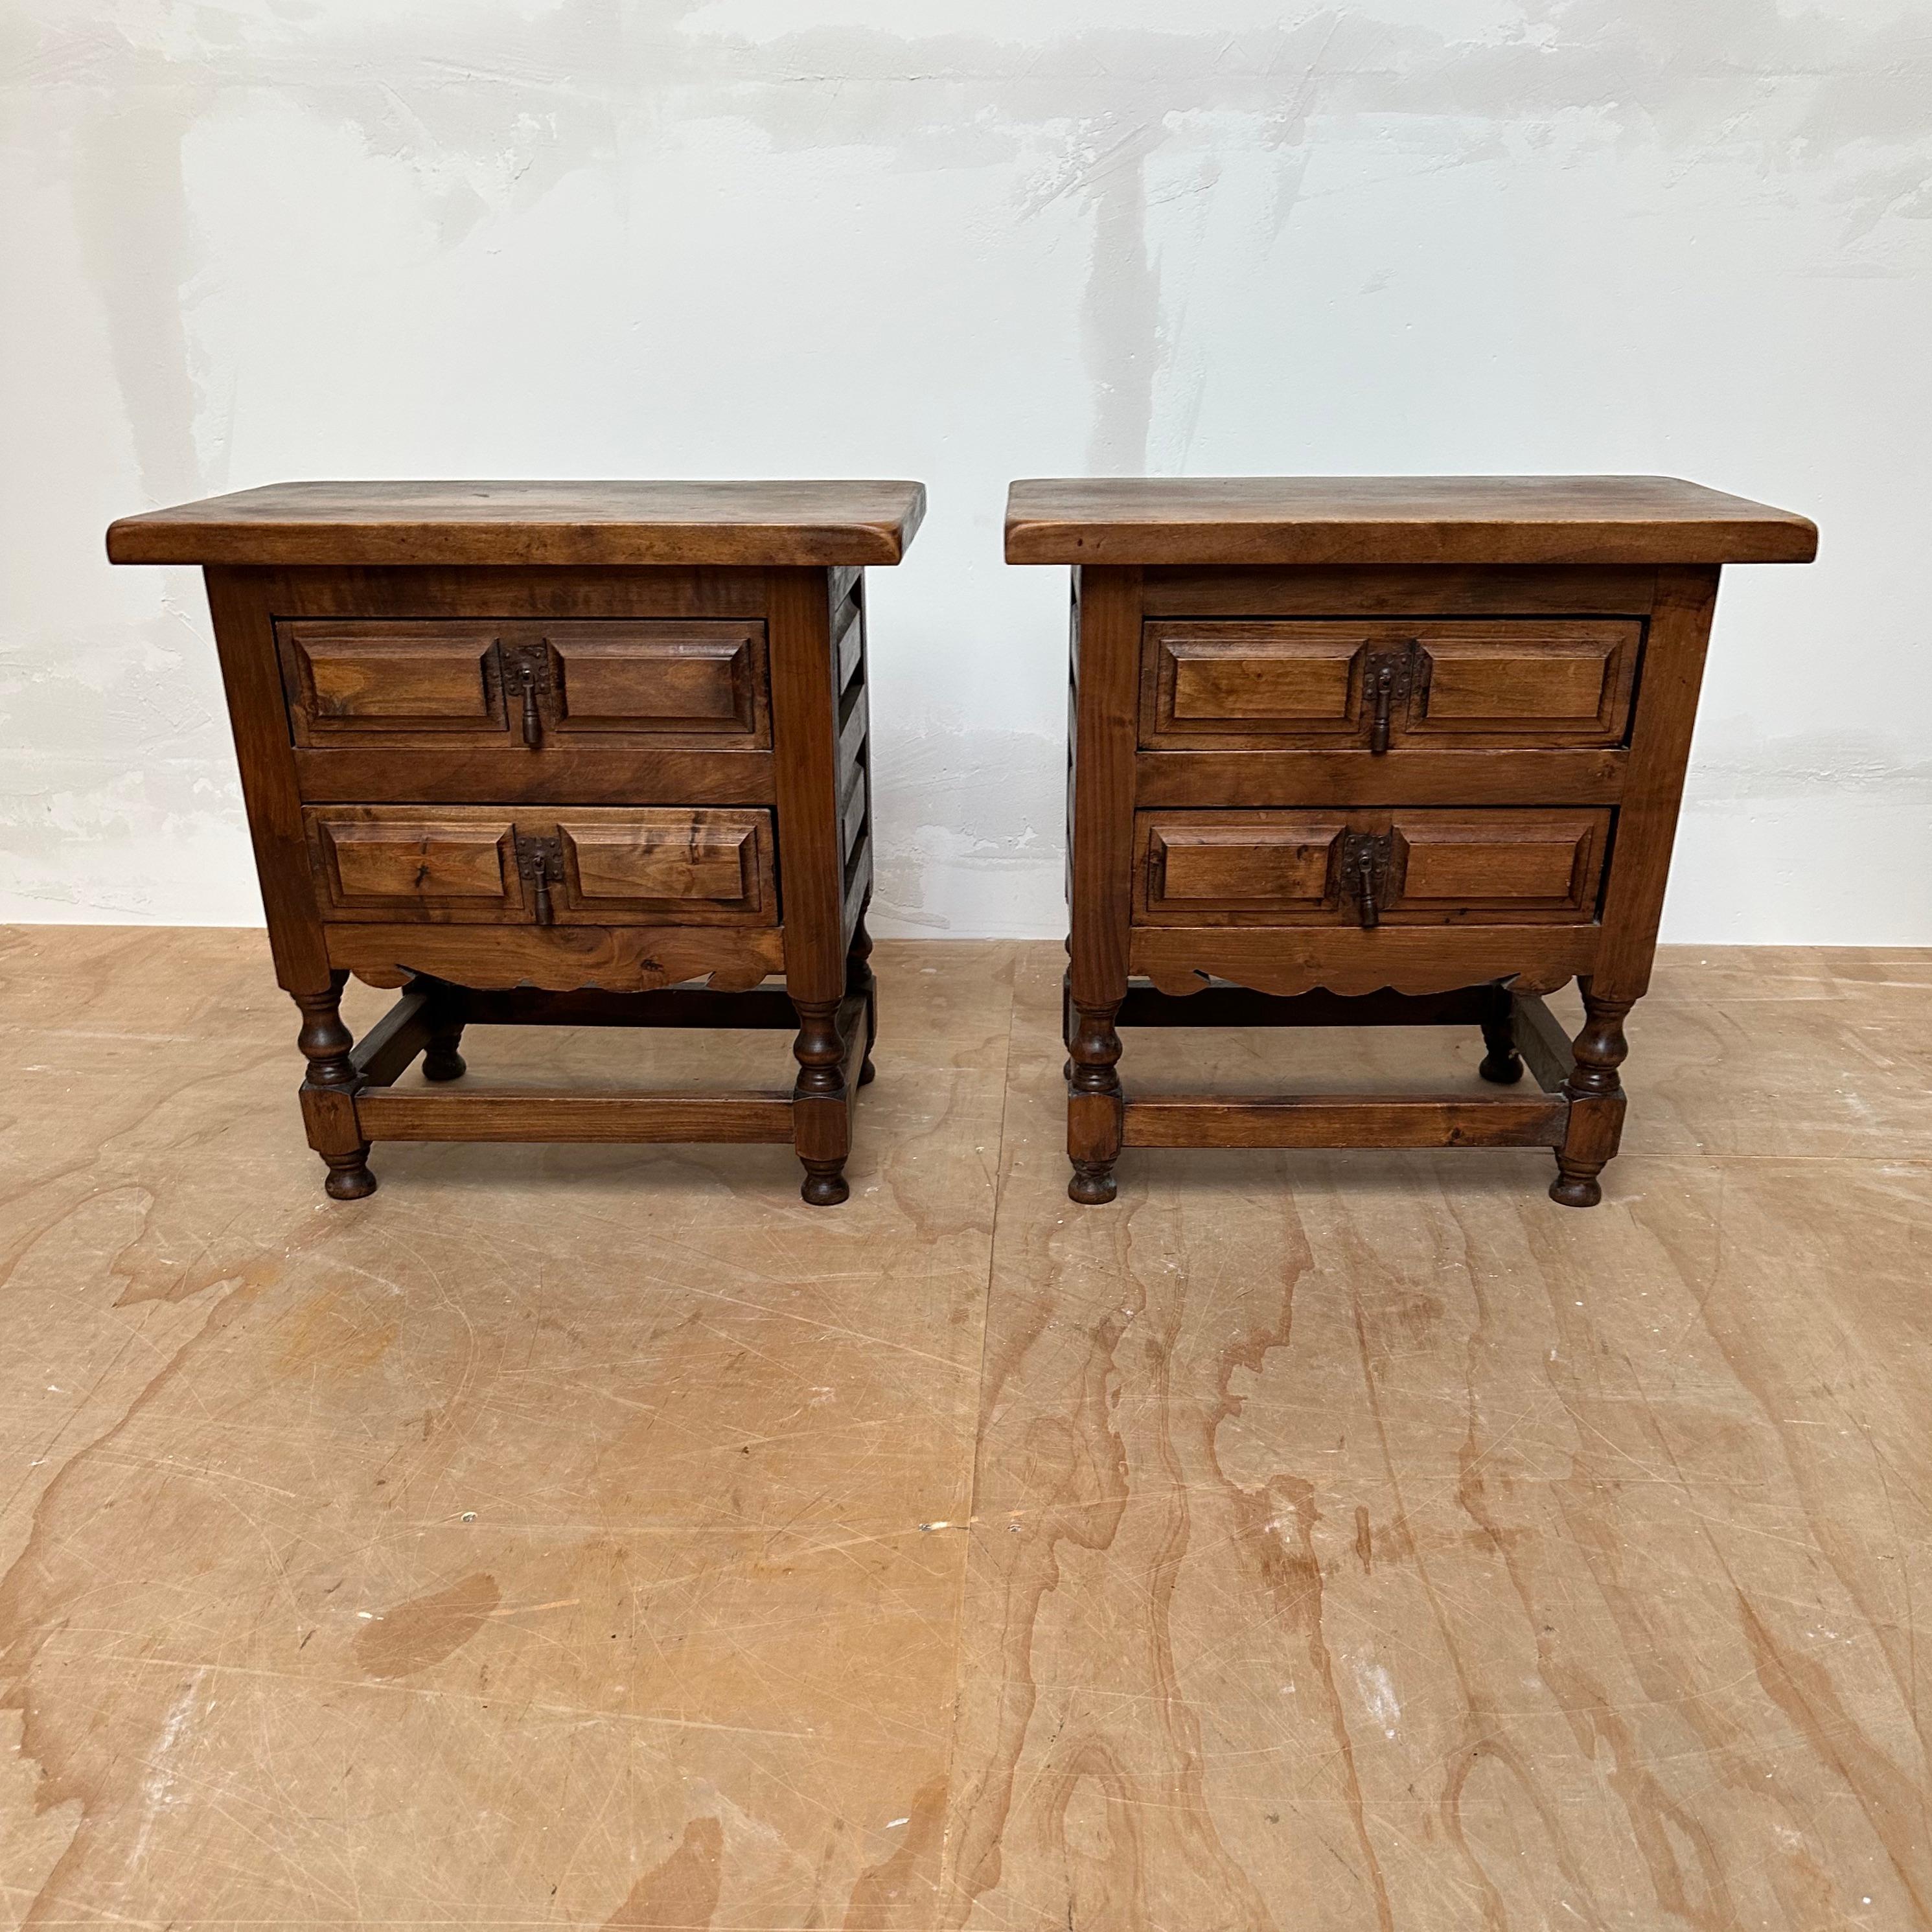 Stylish and practical set of two Spanish pine nightstands.

If you are looking for the perfect pair of vintage bedside tables to complete your Spanish or hacienda style bedroom (or hallway or living room) then this rare and all handcrafted pair from